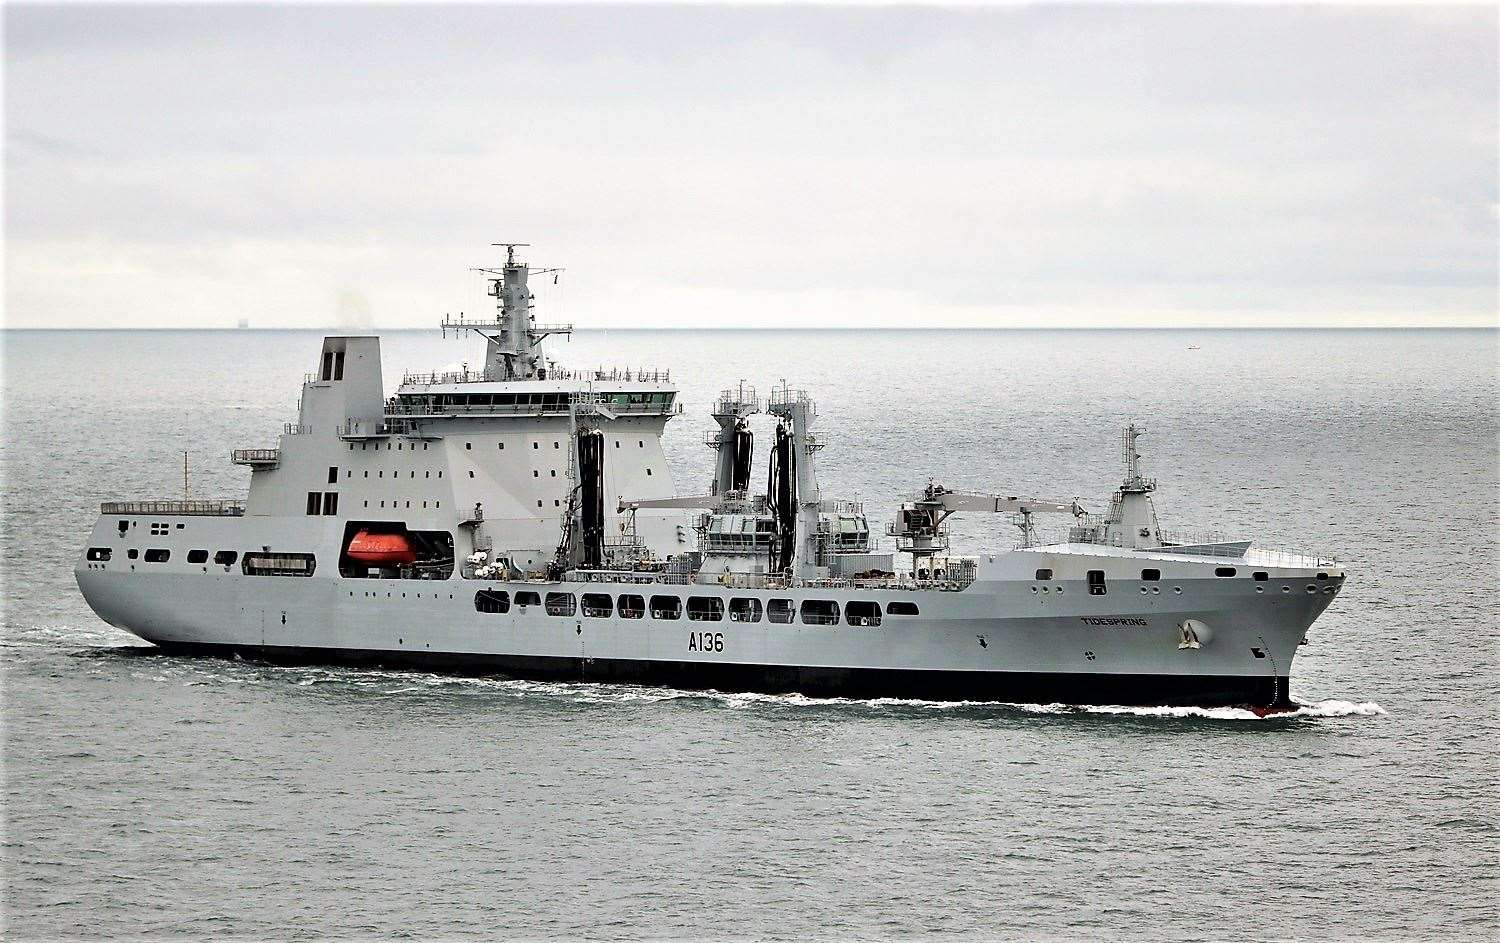 An image supplied by the Royal Navy's press department shows a more detailed view of the specialist ship